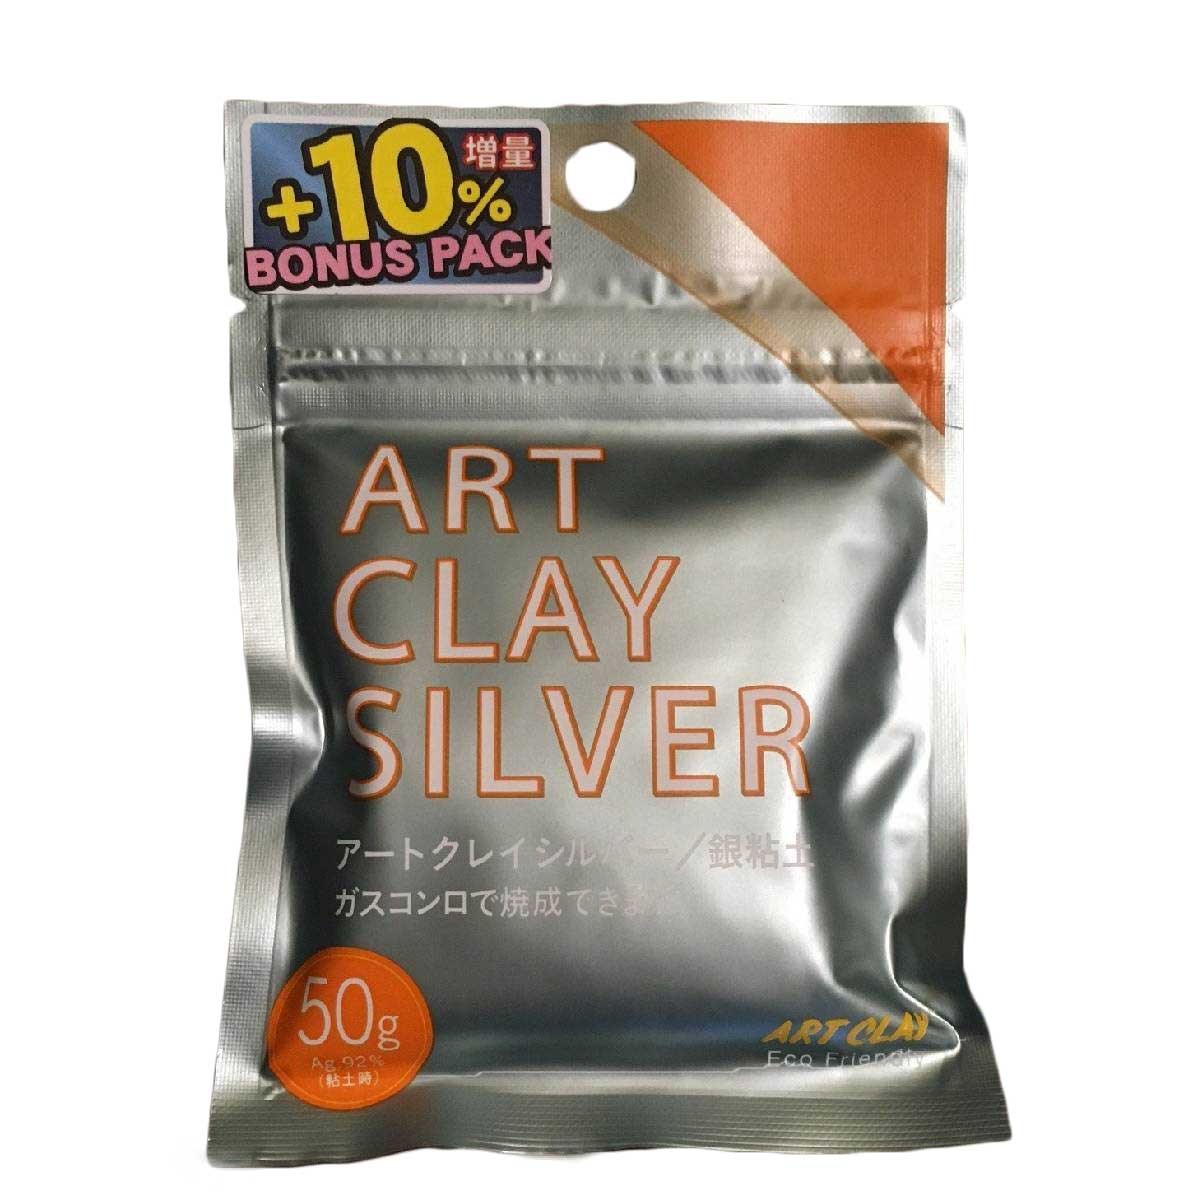 Art Clay Silver Paper Type Long Version (15g)